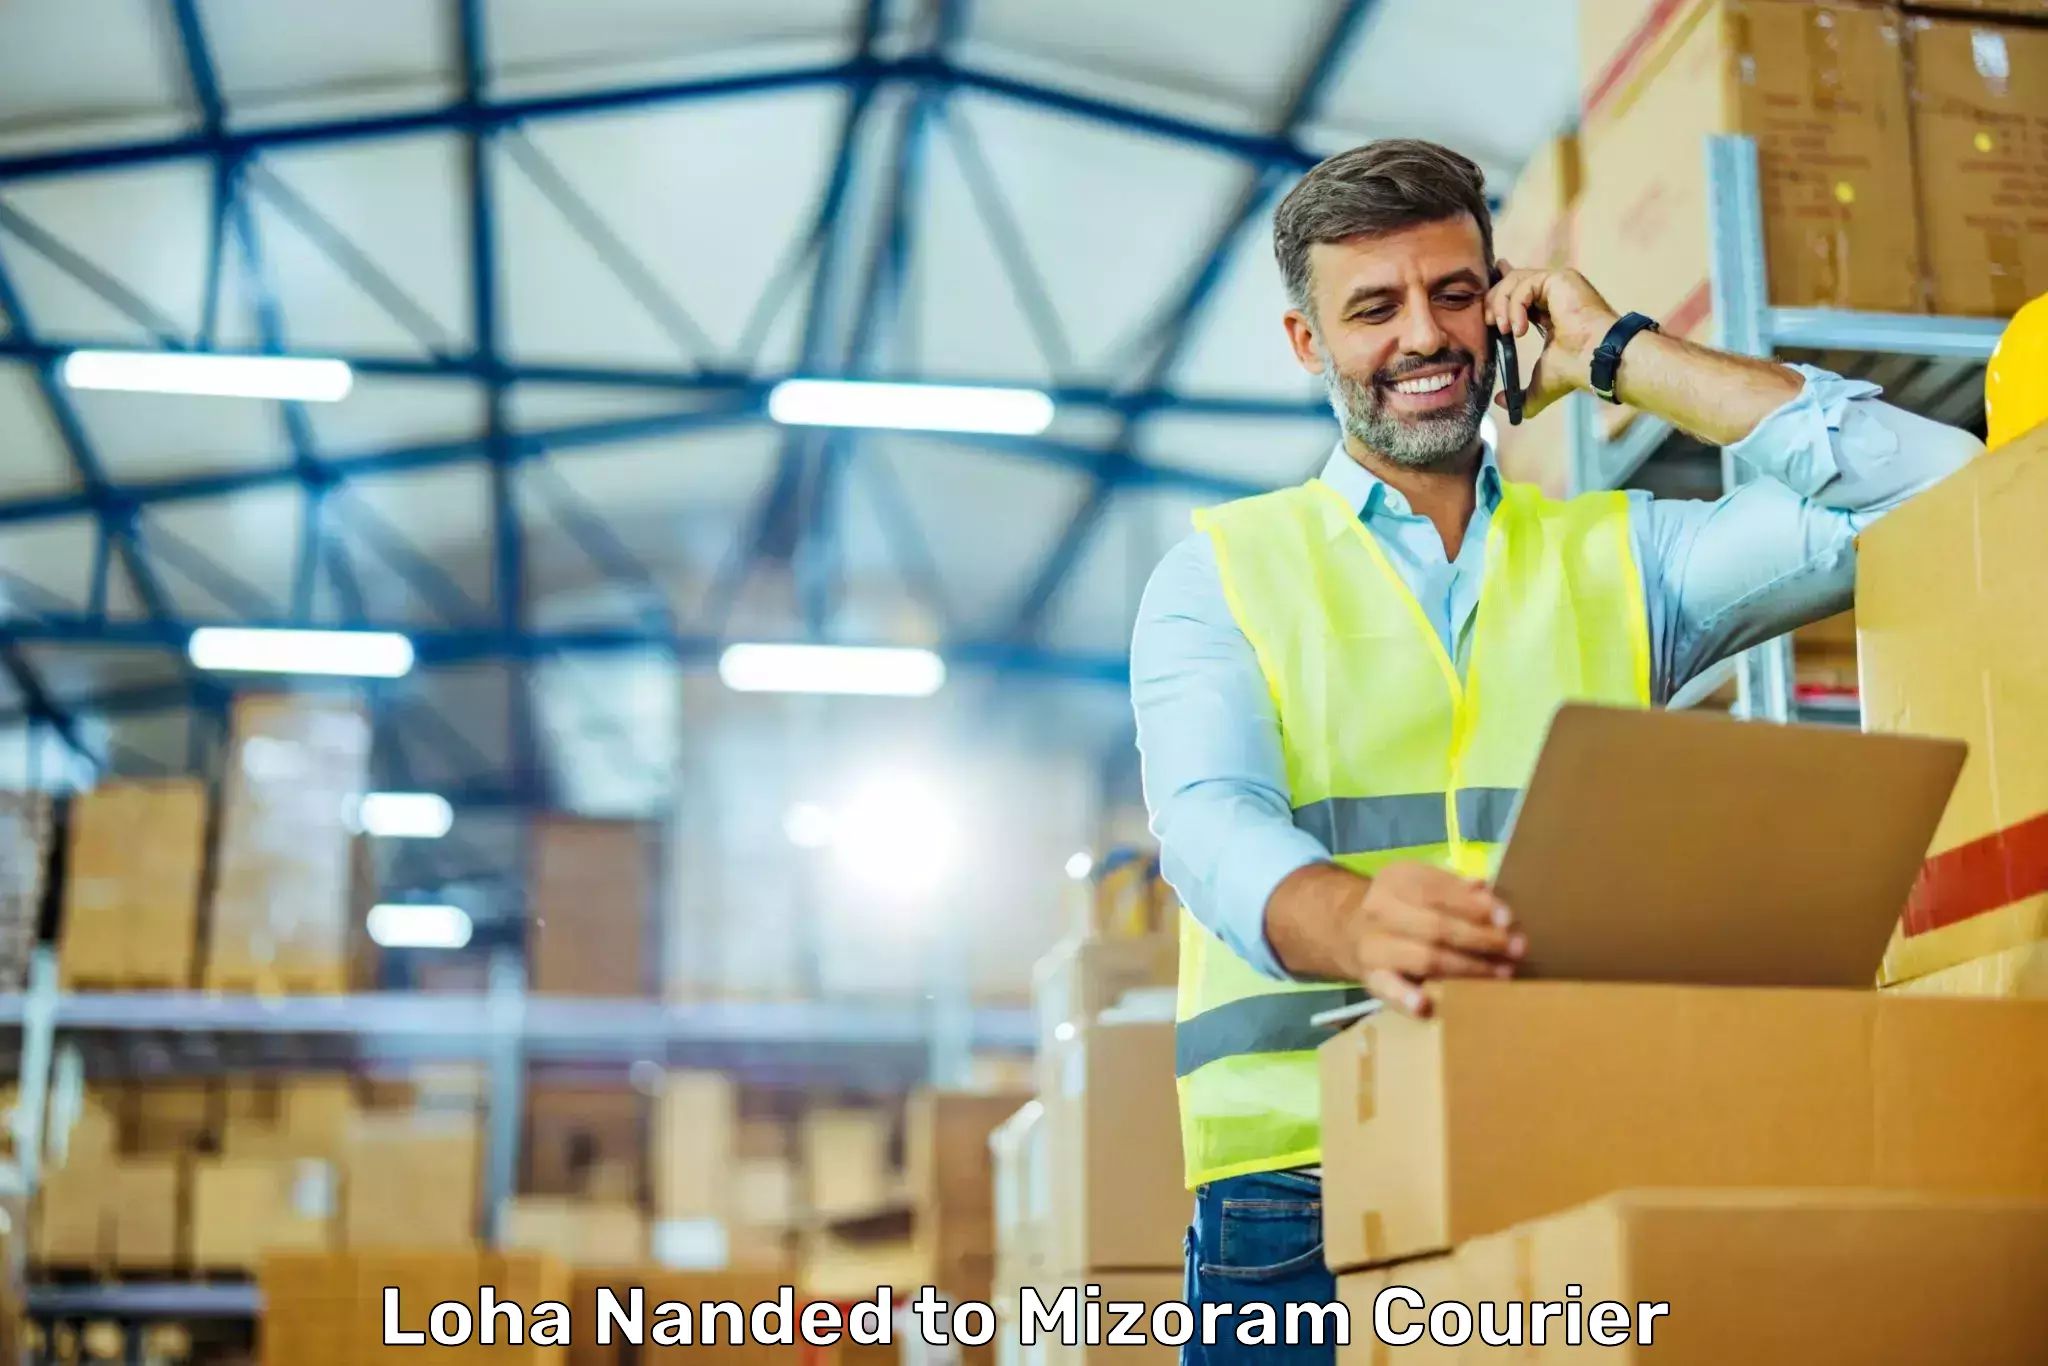 Digital courier platforms Loha Nanded to Darlawn